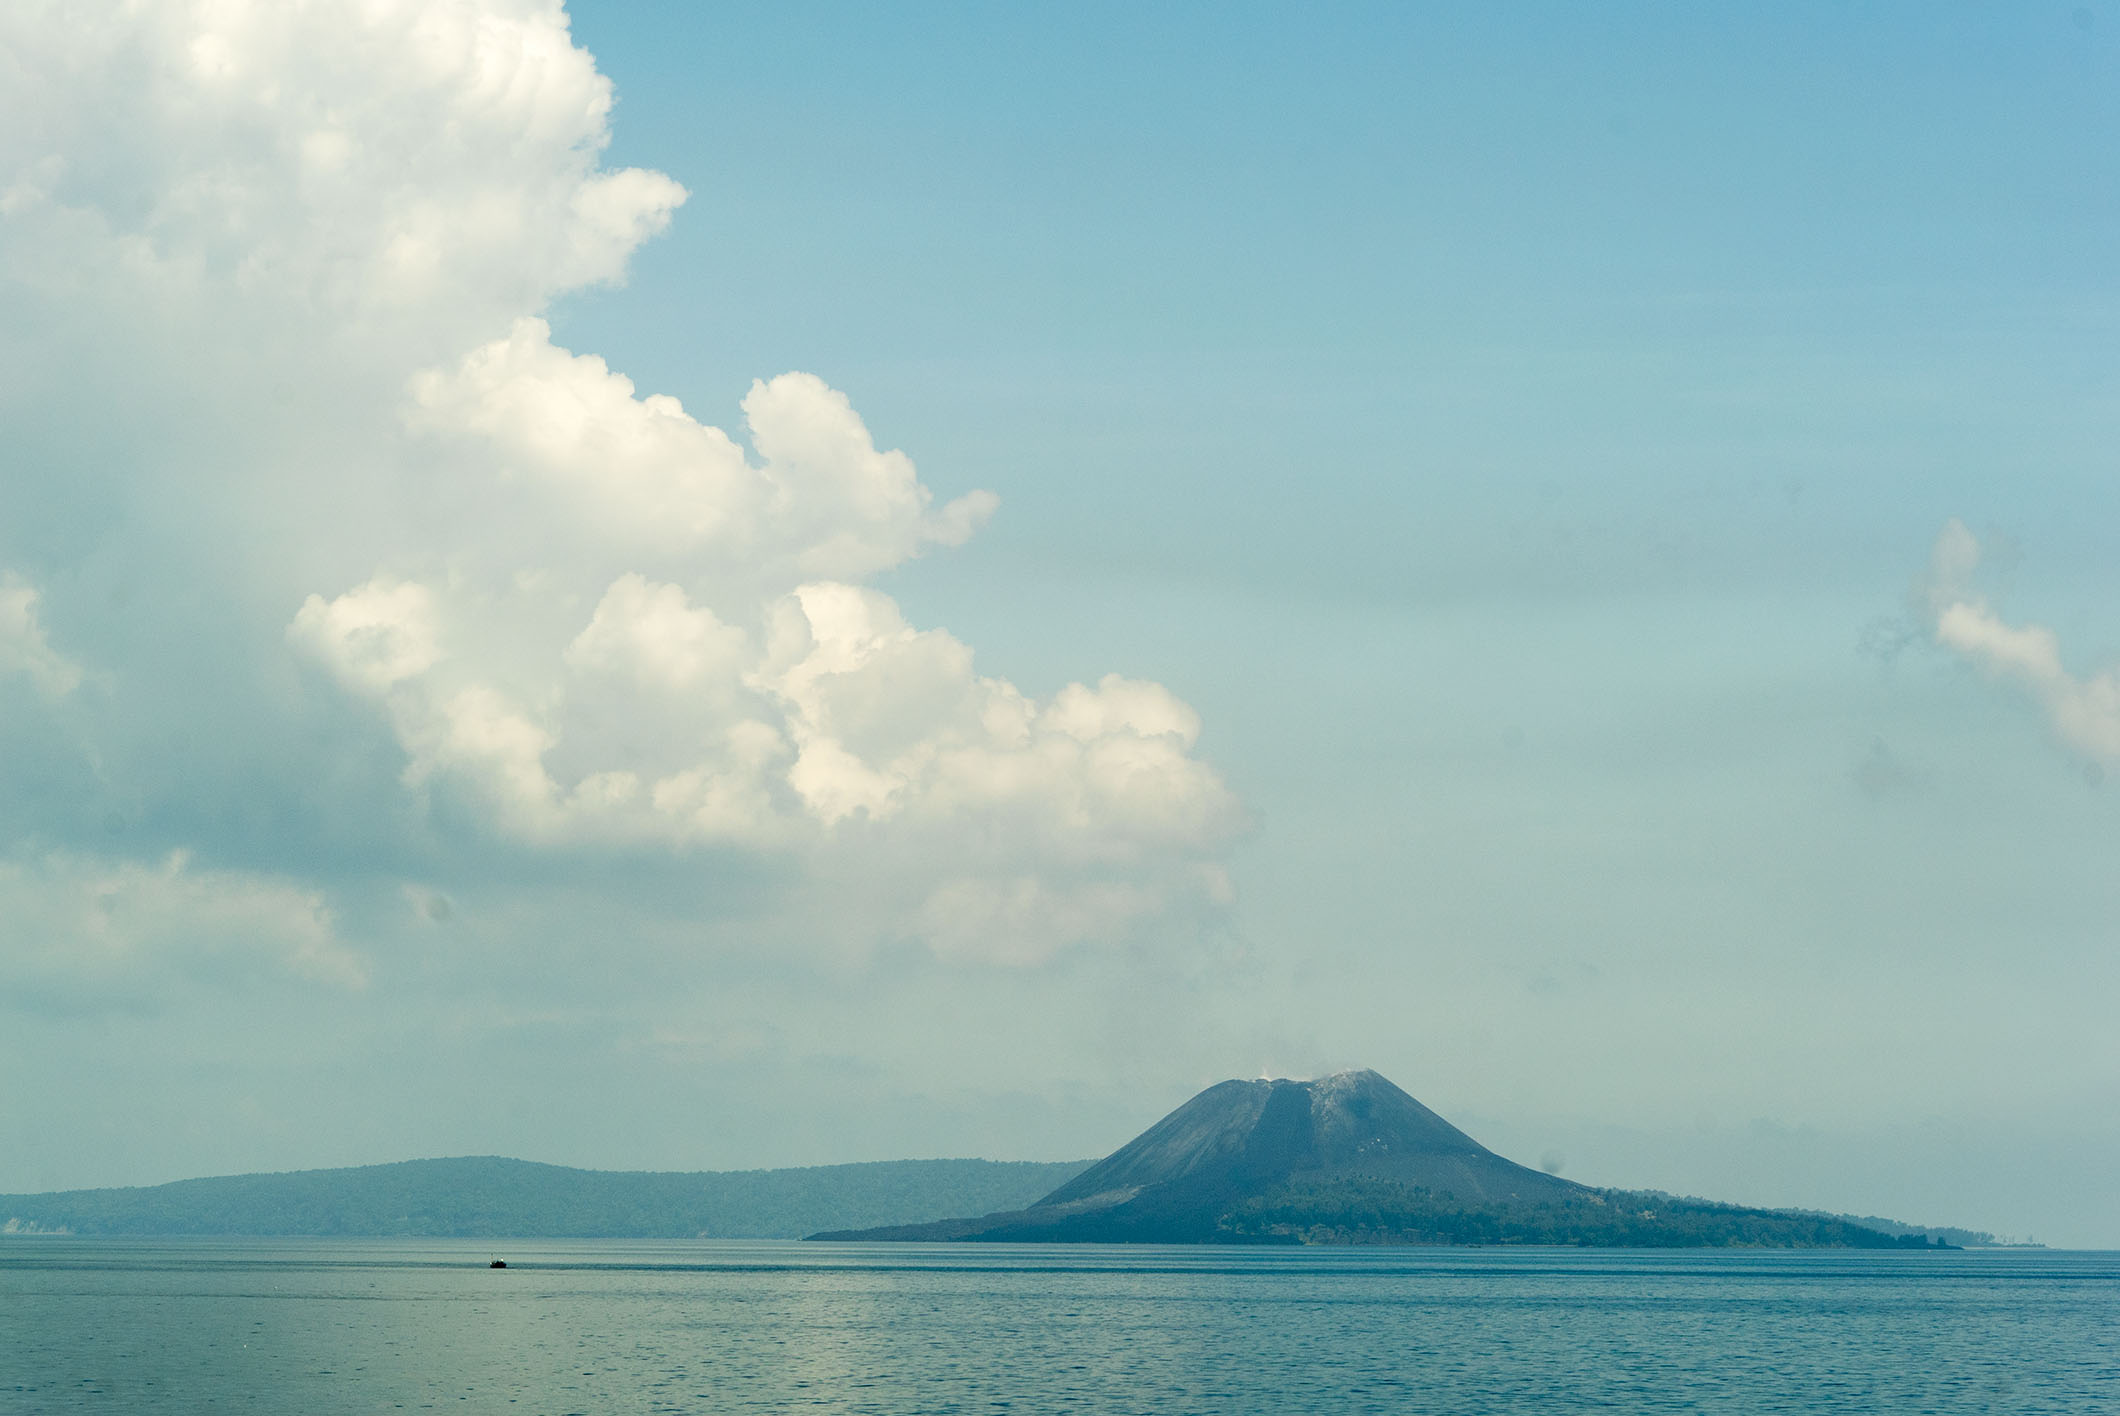 Geological activity, such as volcanic eruptions, can impact global climate. The infamous Krakatoa explosion changed weather around the planet for years (Source: EOS/ Monika Naranjo Gonzalez)